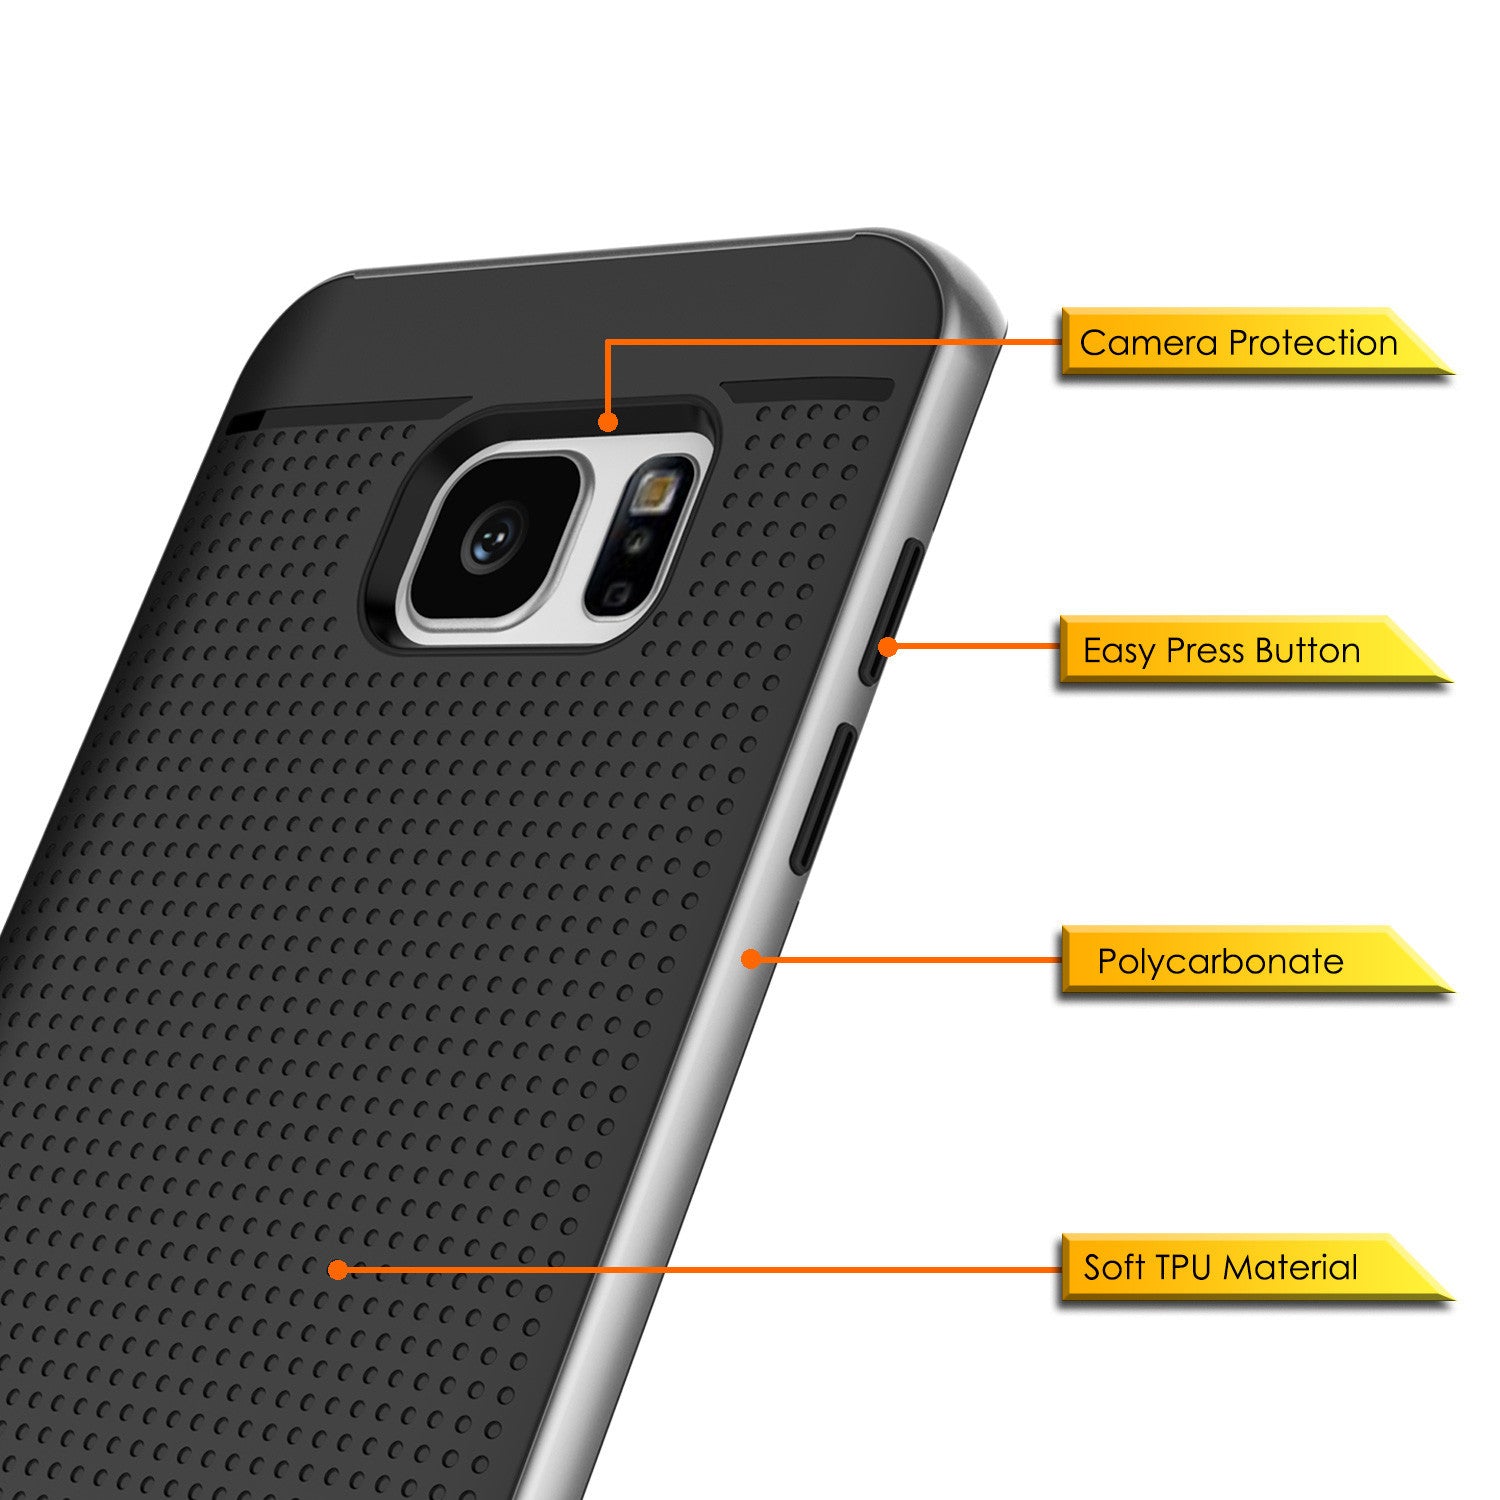 Galaxy S7 Edge Case, Punkcase Stealth Silver Series Hybrid 3-Piece Shockproof Dual Layer Cover